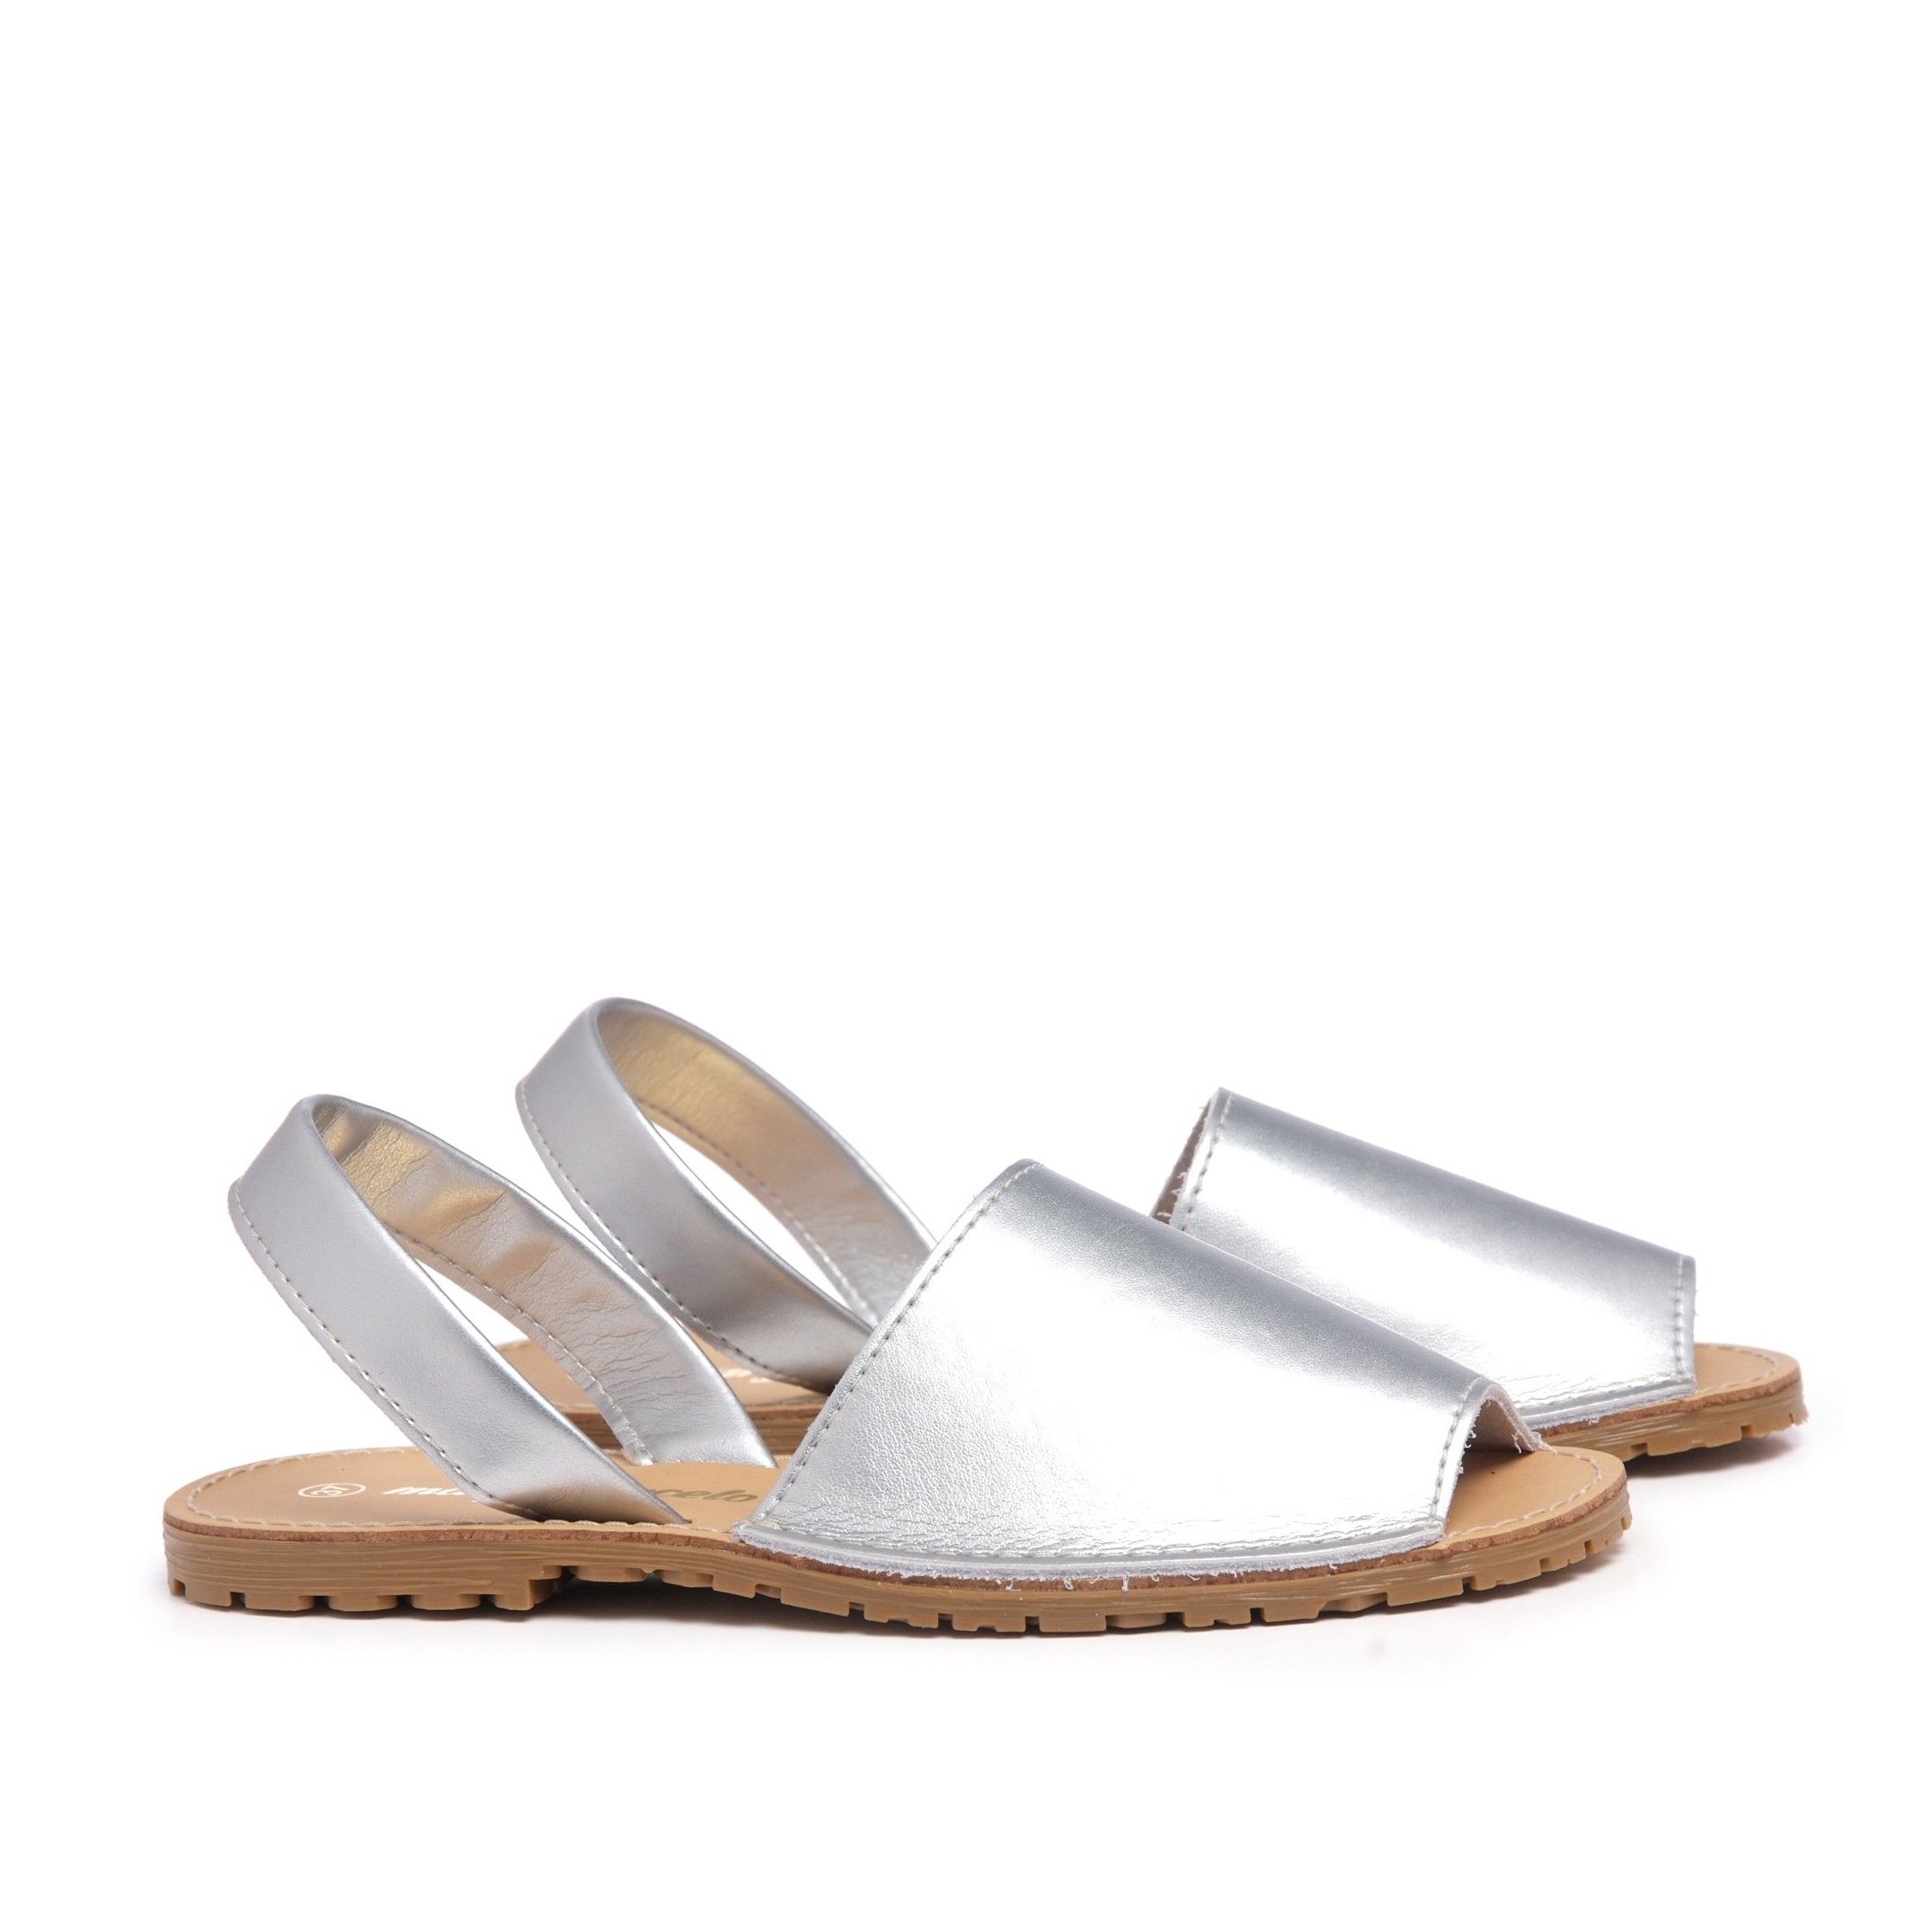 Classic leather metalized sandal Menorquina. Upper and inner: leather. Sole: anti-slip rubber. MADE IN SPAIN